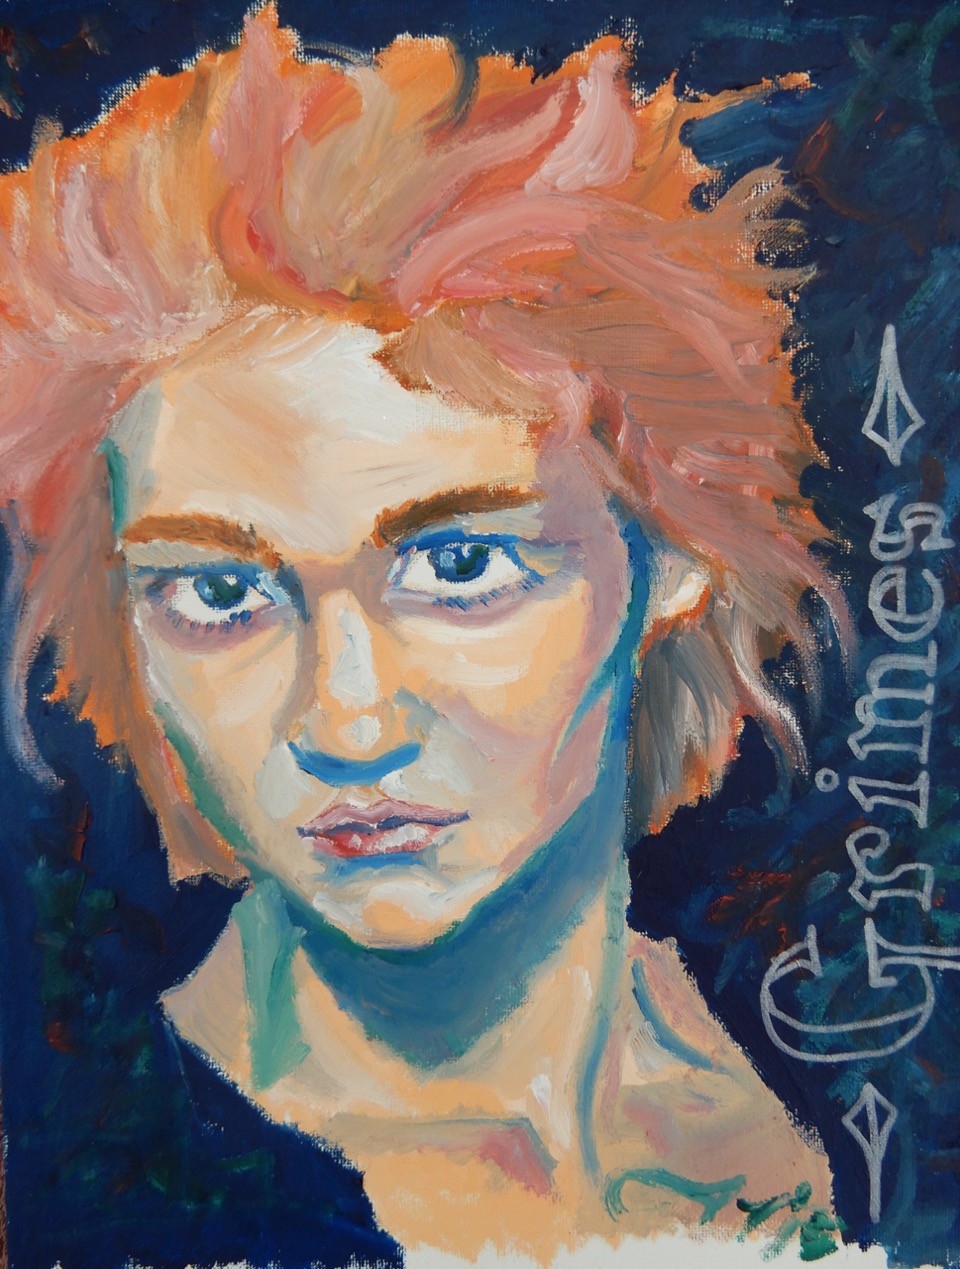 painting by Augie Collier, called “Grimes”. This is a portrait of a person with short chopped red hair, wearing a dark blue top. It is not clear what the person’s gender is, and the person’s expression is very intense. 